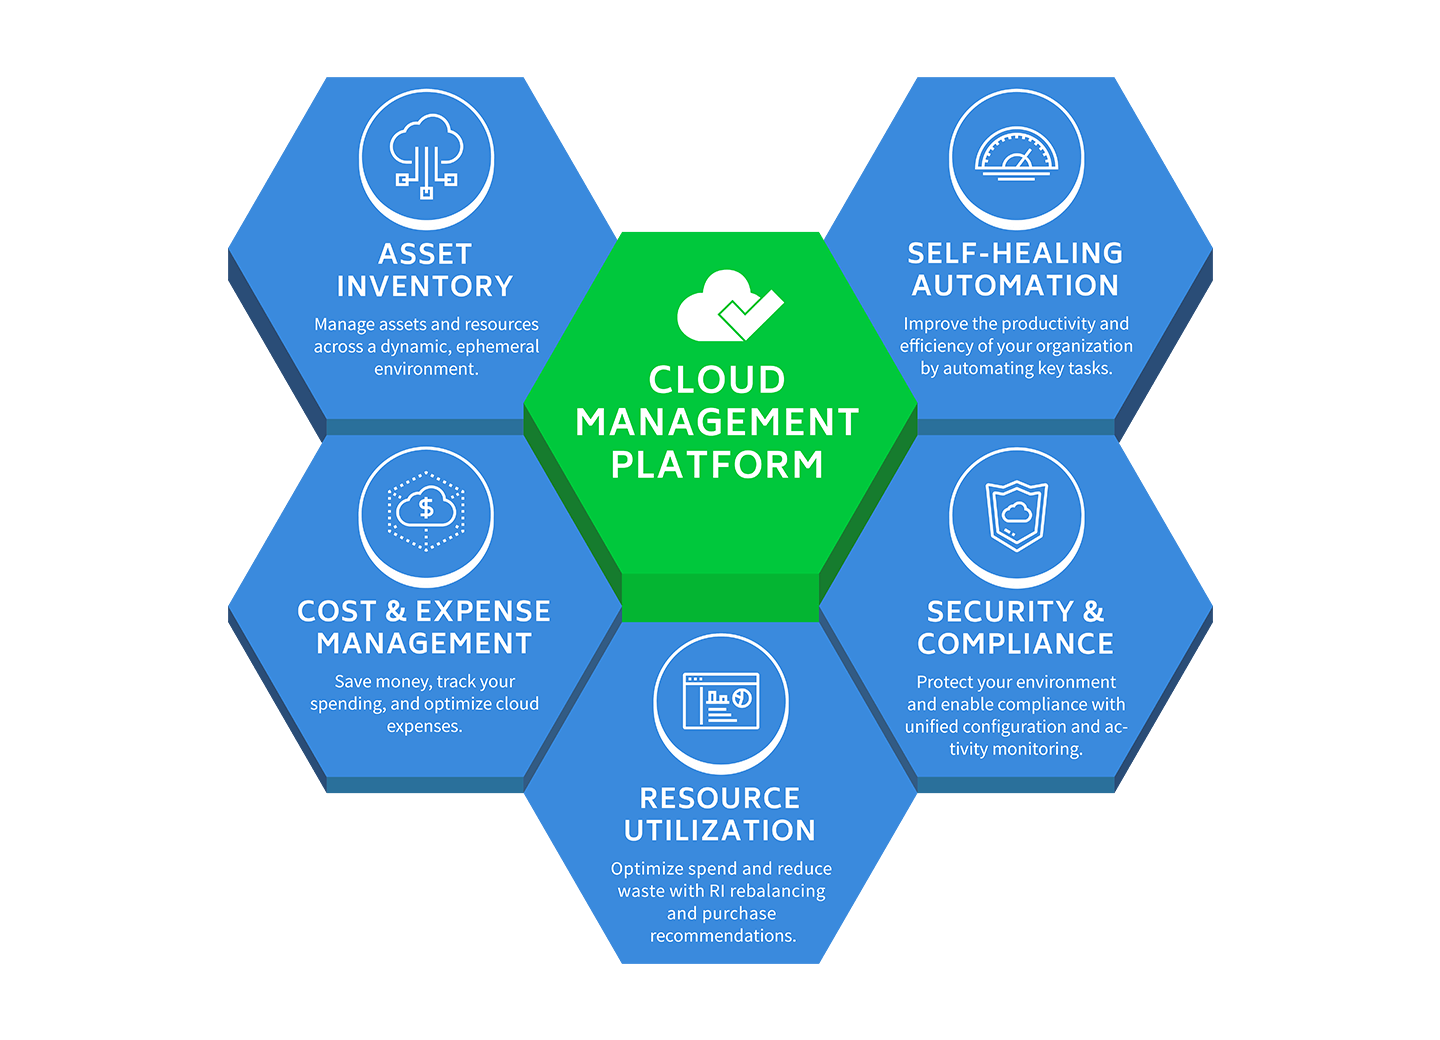  A dashboard of a cloud management platform that shows the asset inventory, cost and expense management, resource utilization, self-healing automation, and security and compliance.